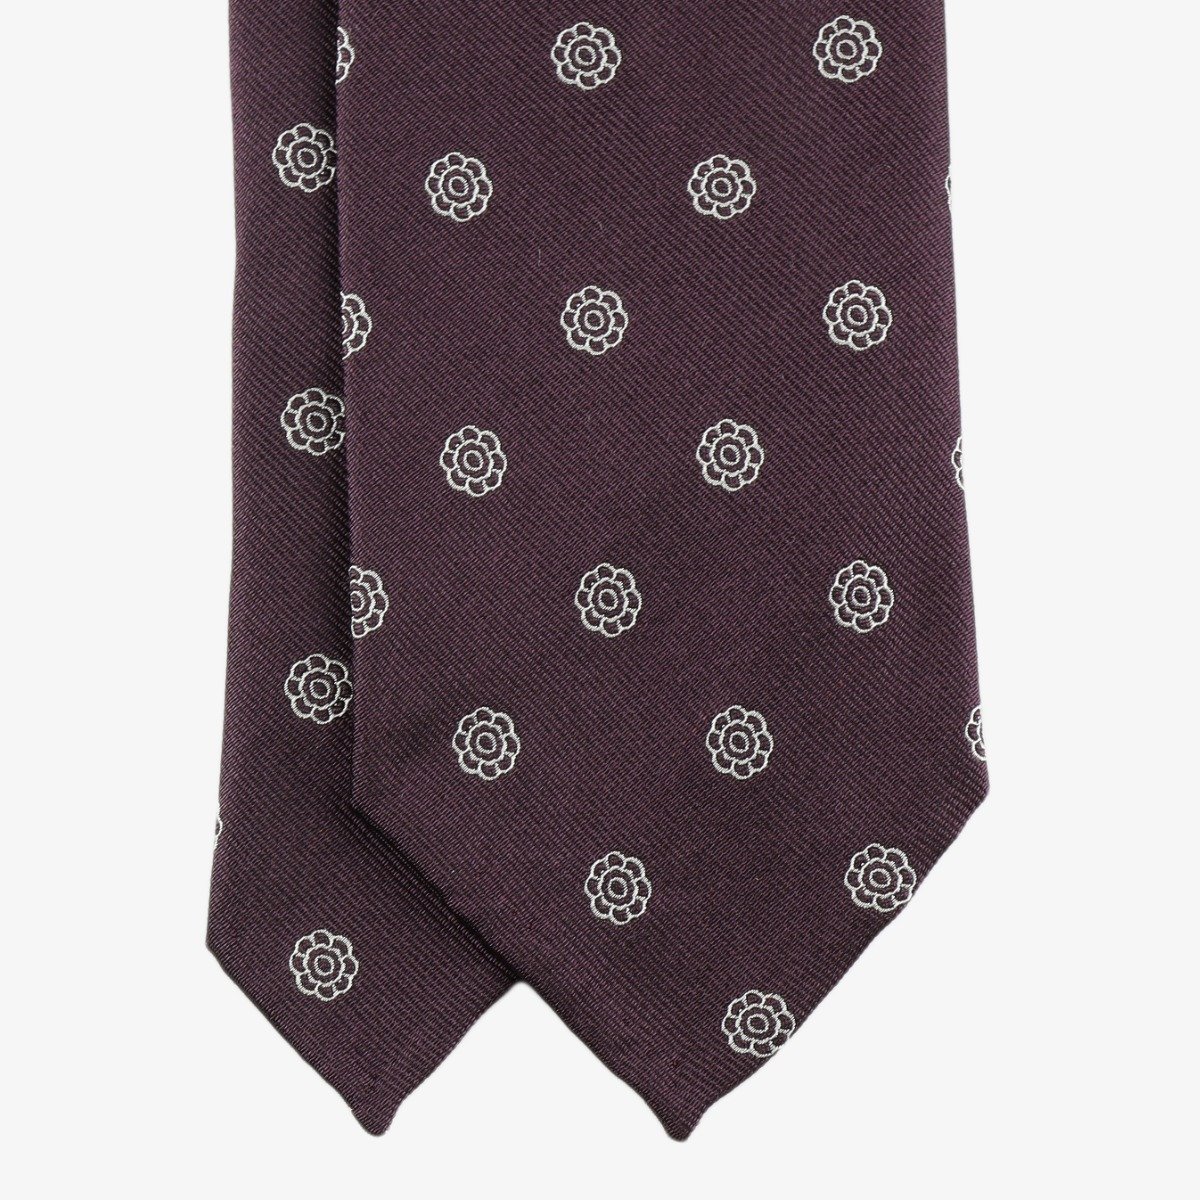 Shibumi Firenze eggplant silk tie with white floral pattern